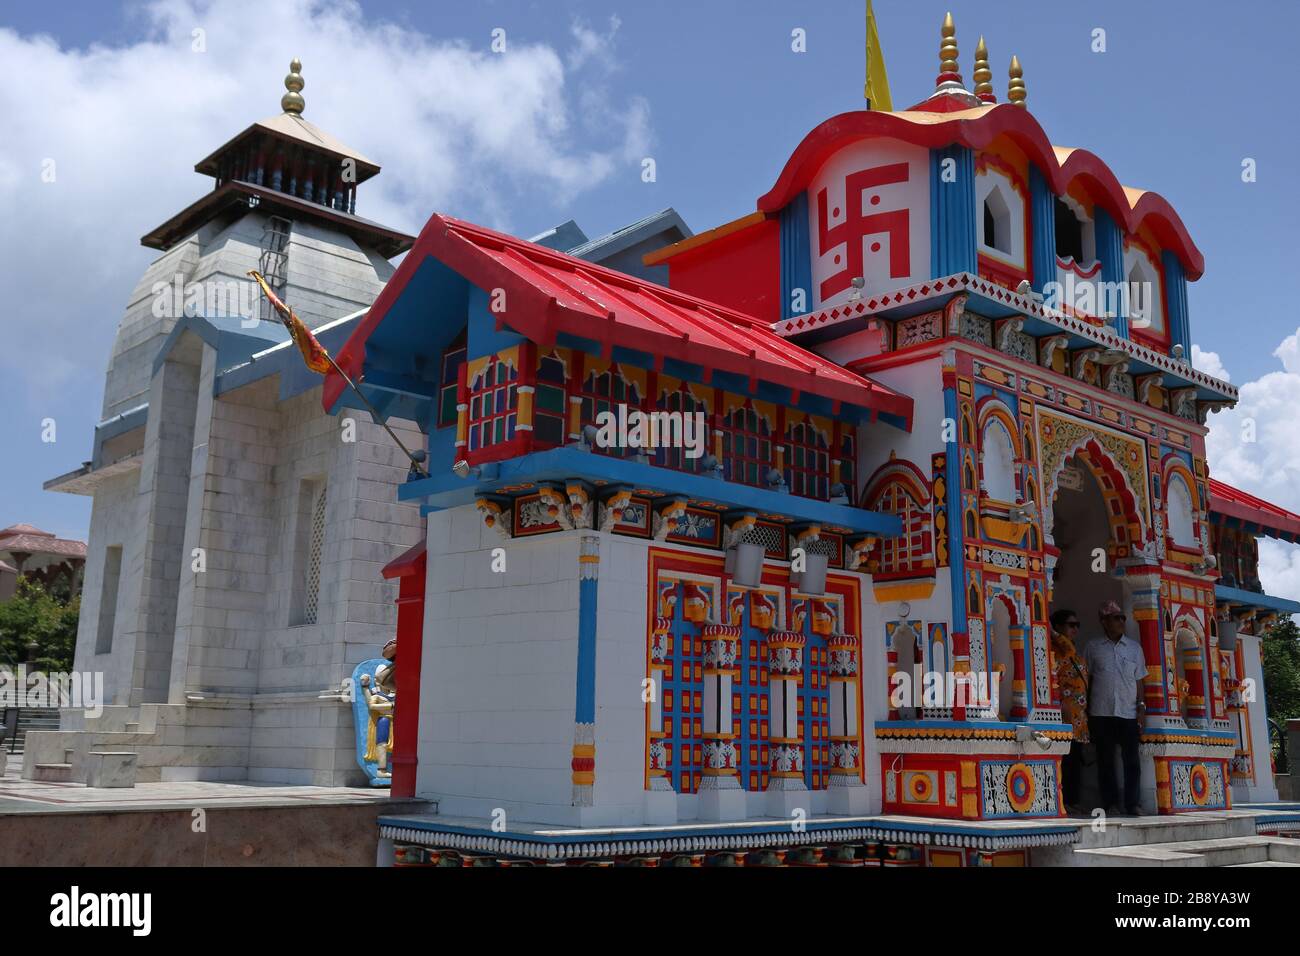 Copy of Badrinath Dham temple at Char dham in Namchi, Sikkim, India Stock Photo